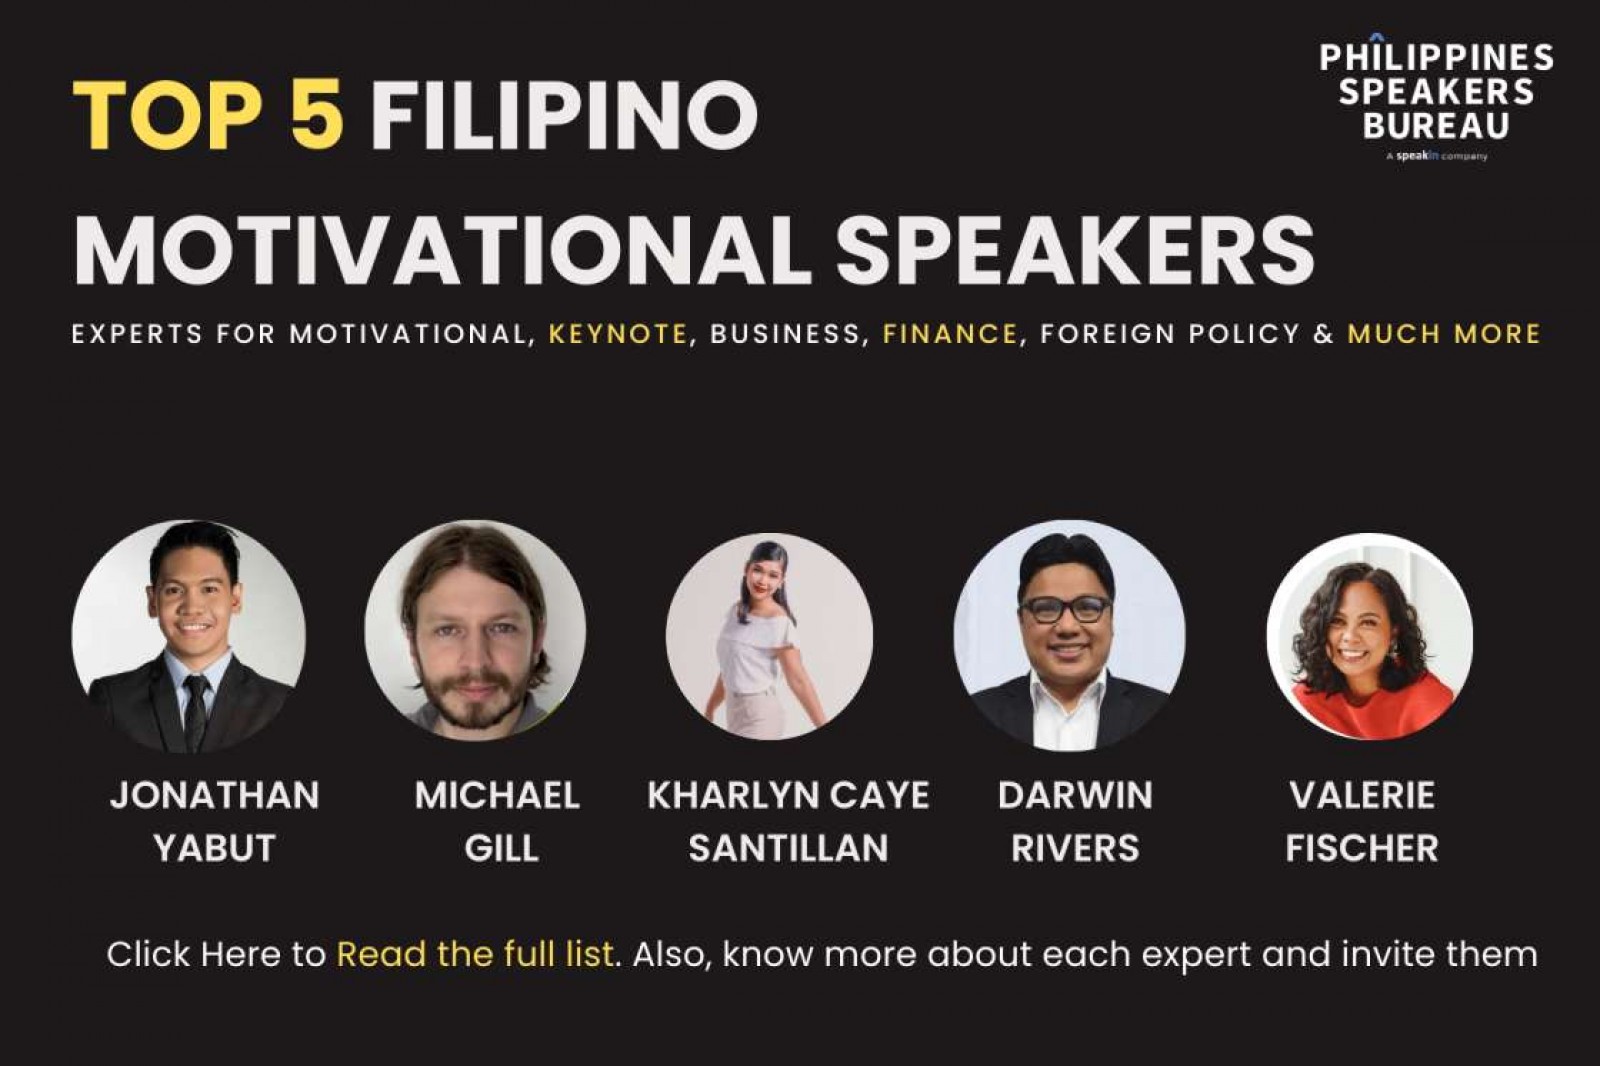 Top 5 Filipino Motivational Speakers You Should Hear